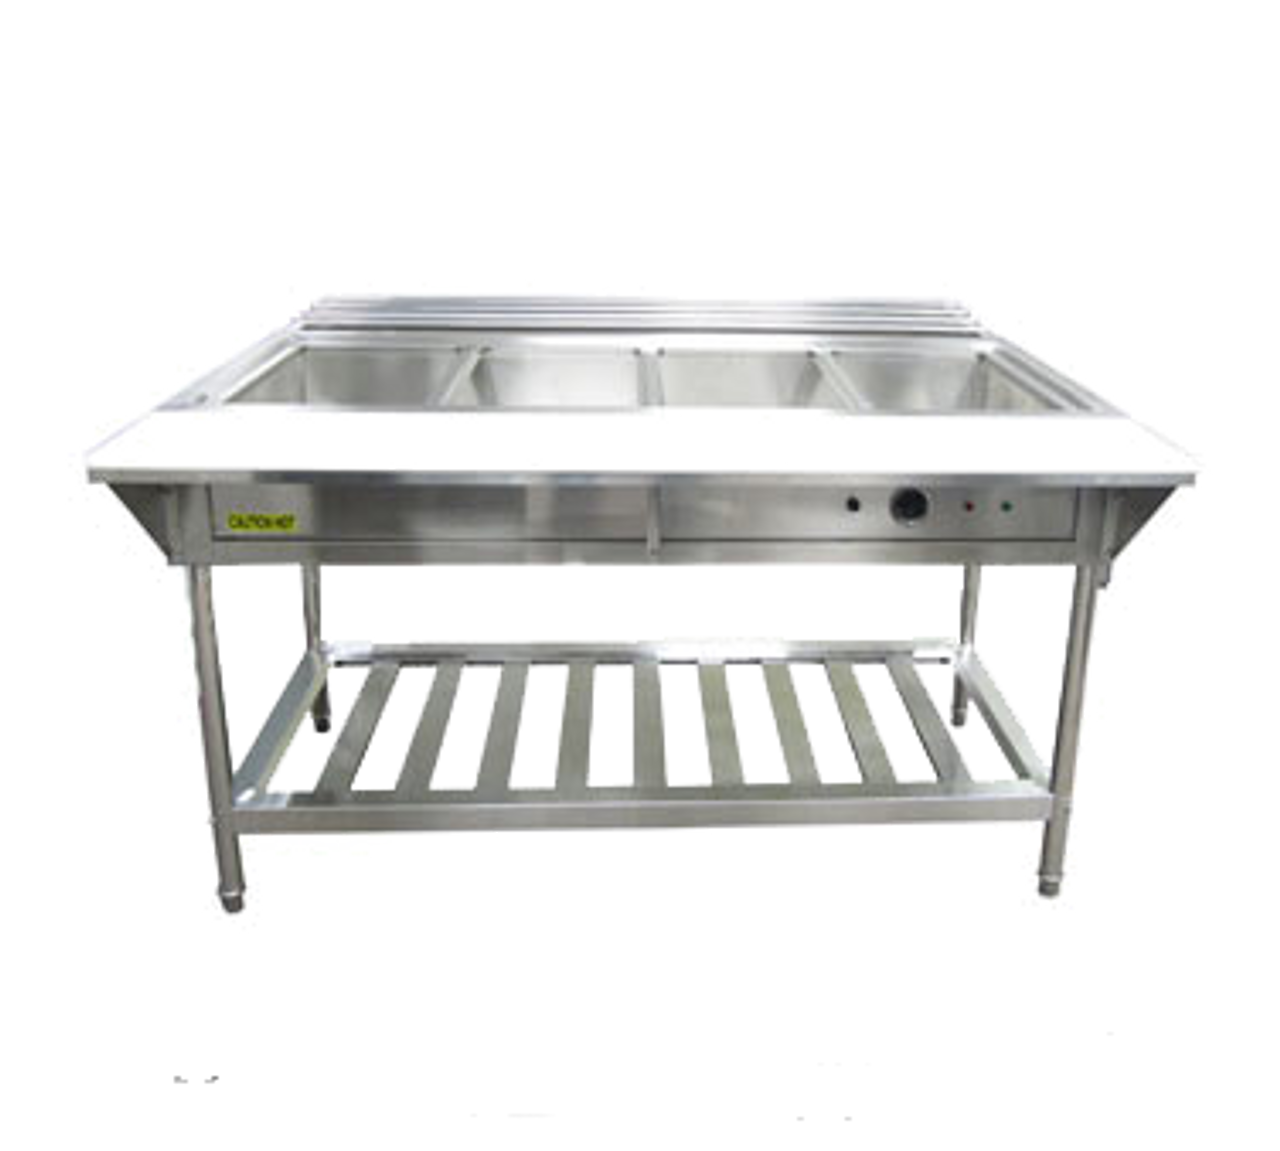 Water Bath Steam Table Starter Kit, 57-1/4"W x 26"D x 34-1/4"H, 4-compartment, 12" x 20" x  8-1/2" deep wells (EST-240), 9" wide polycarbonate cutting board with shelf (EST-240/PCB), 4-rail tray slide holder (EST240/TH), thermostatic control dial, low water cutoff sensor with reset button, 304 stainless steel fully welded water pan, single heating element, 3/4" drainage pipe, adjustable legs with bullet ends, undershelf, stainless steel, includes bonus package: (4) full size 4" deep food pans with lids, (1) stainless steel 13" solid basting spoon, (1) stainless steel 13" slotted spoon, and (2) 12" scalloped edge tongs, 208v/240v/60/1-ph, 3000 watt, 12.5 amp, NEMA 6-20P, CE (SPECIAL ORDER) (ships Knocked-Down). SHOWN WITH EST-240 Steam Table